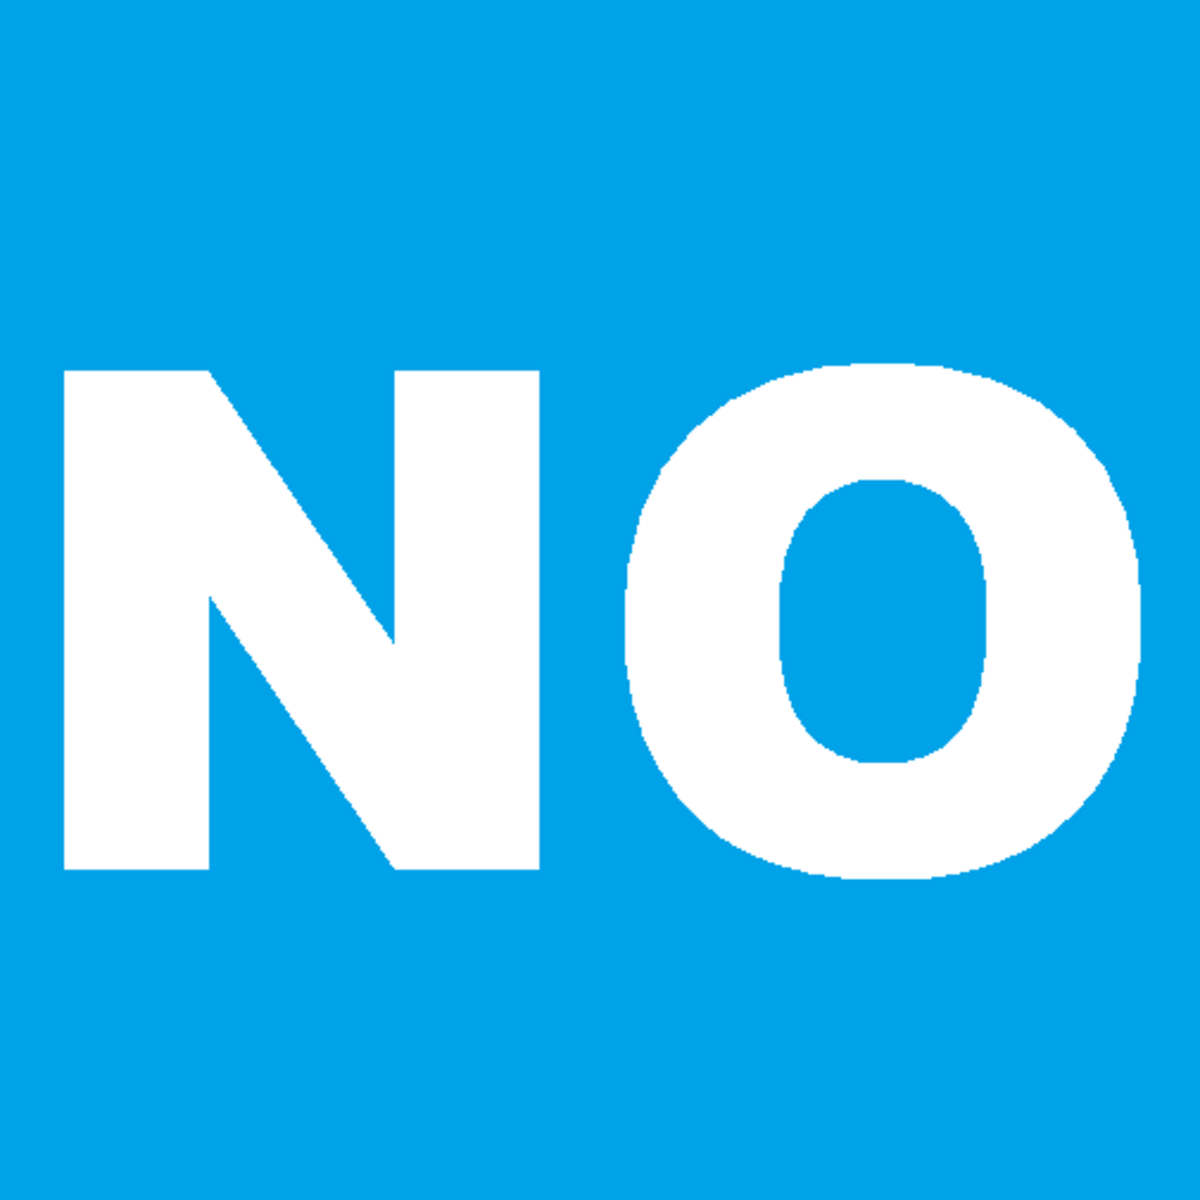 Image result for no